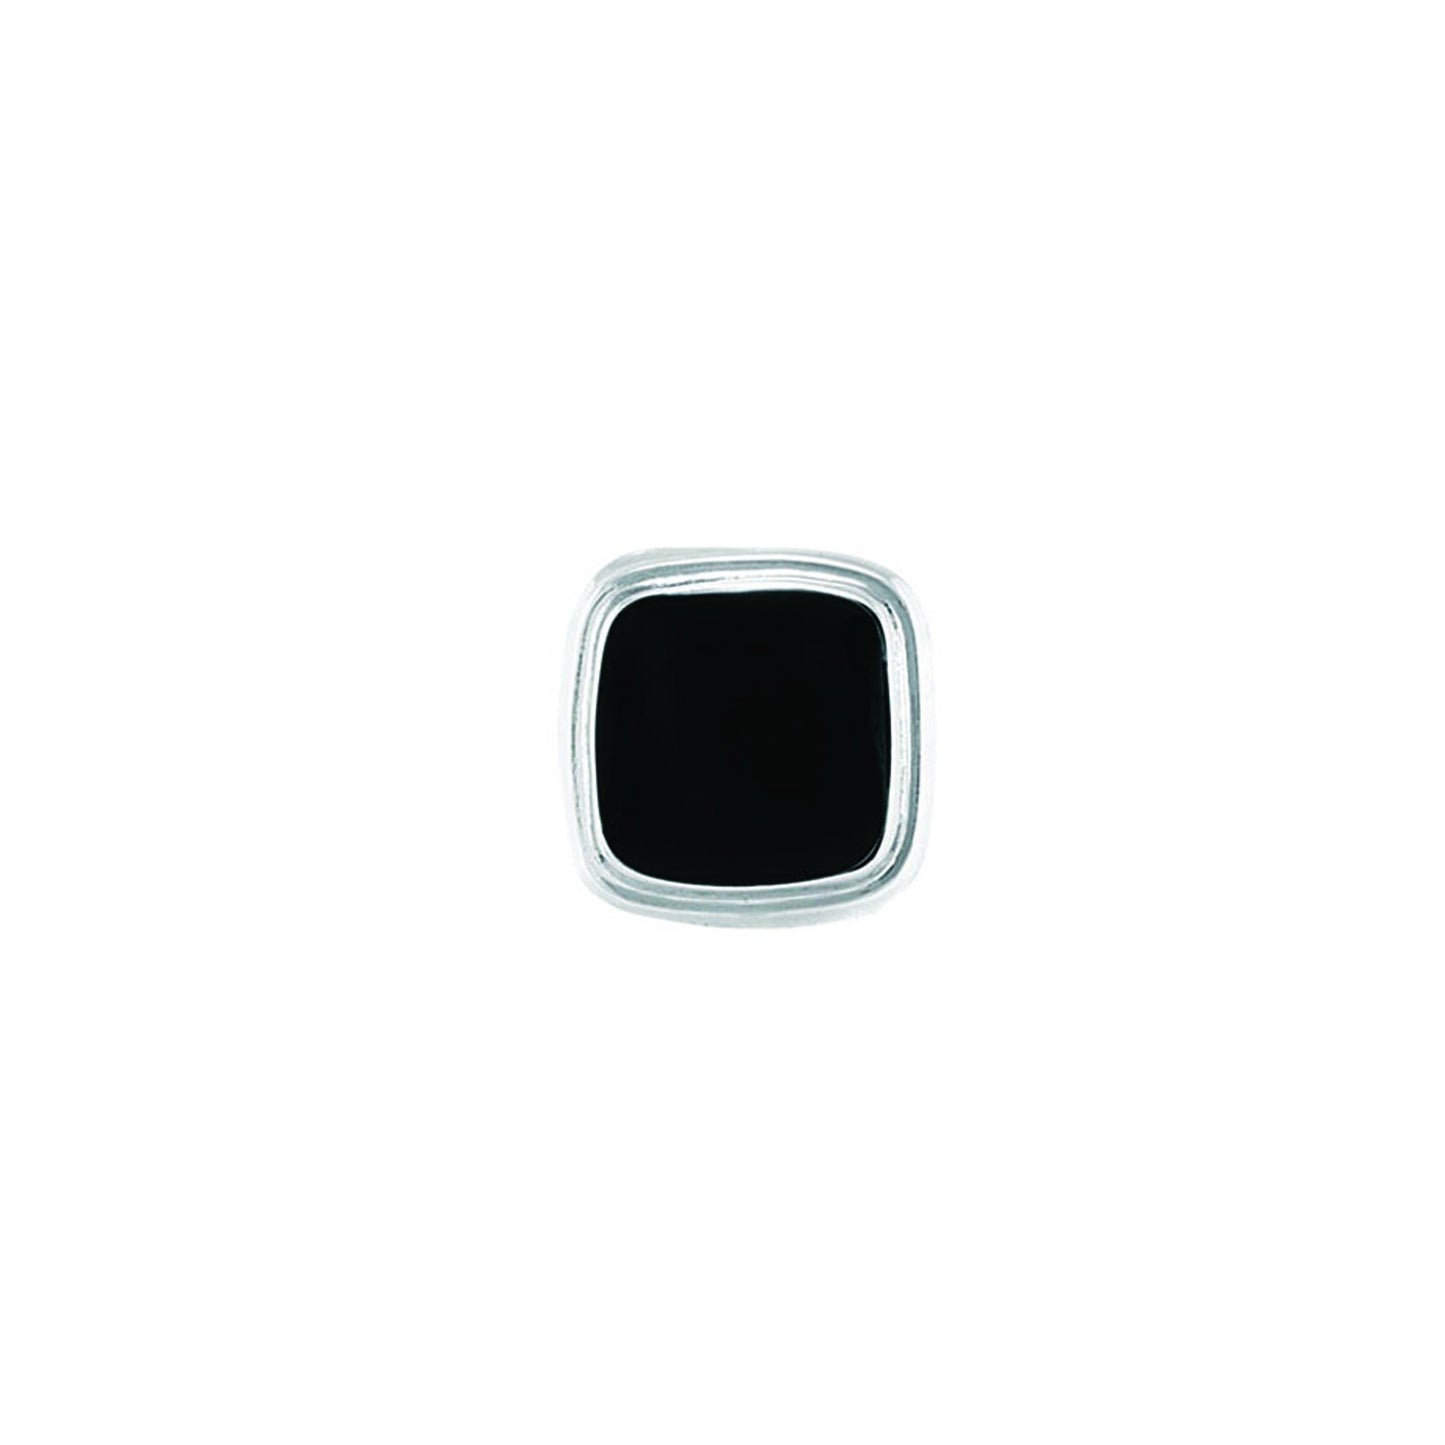 A simulated black onyx accent tie tack displayed on a neutral white background.